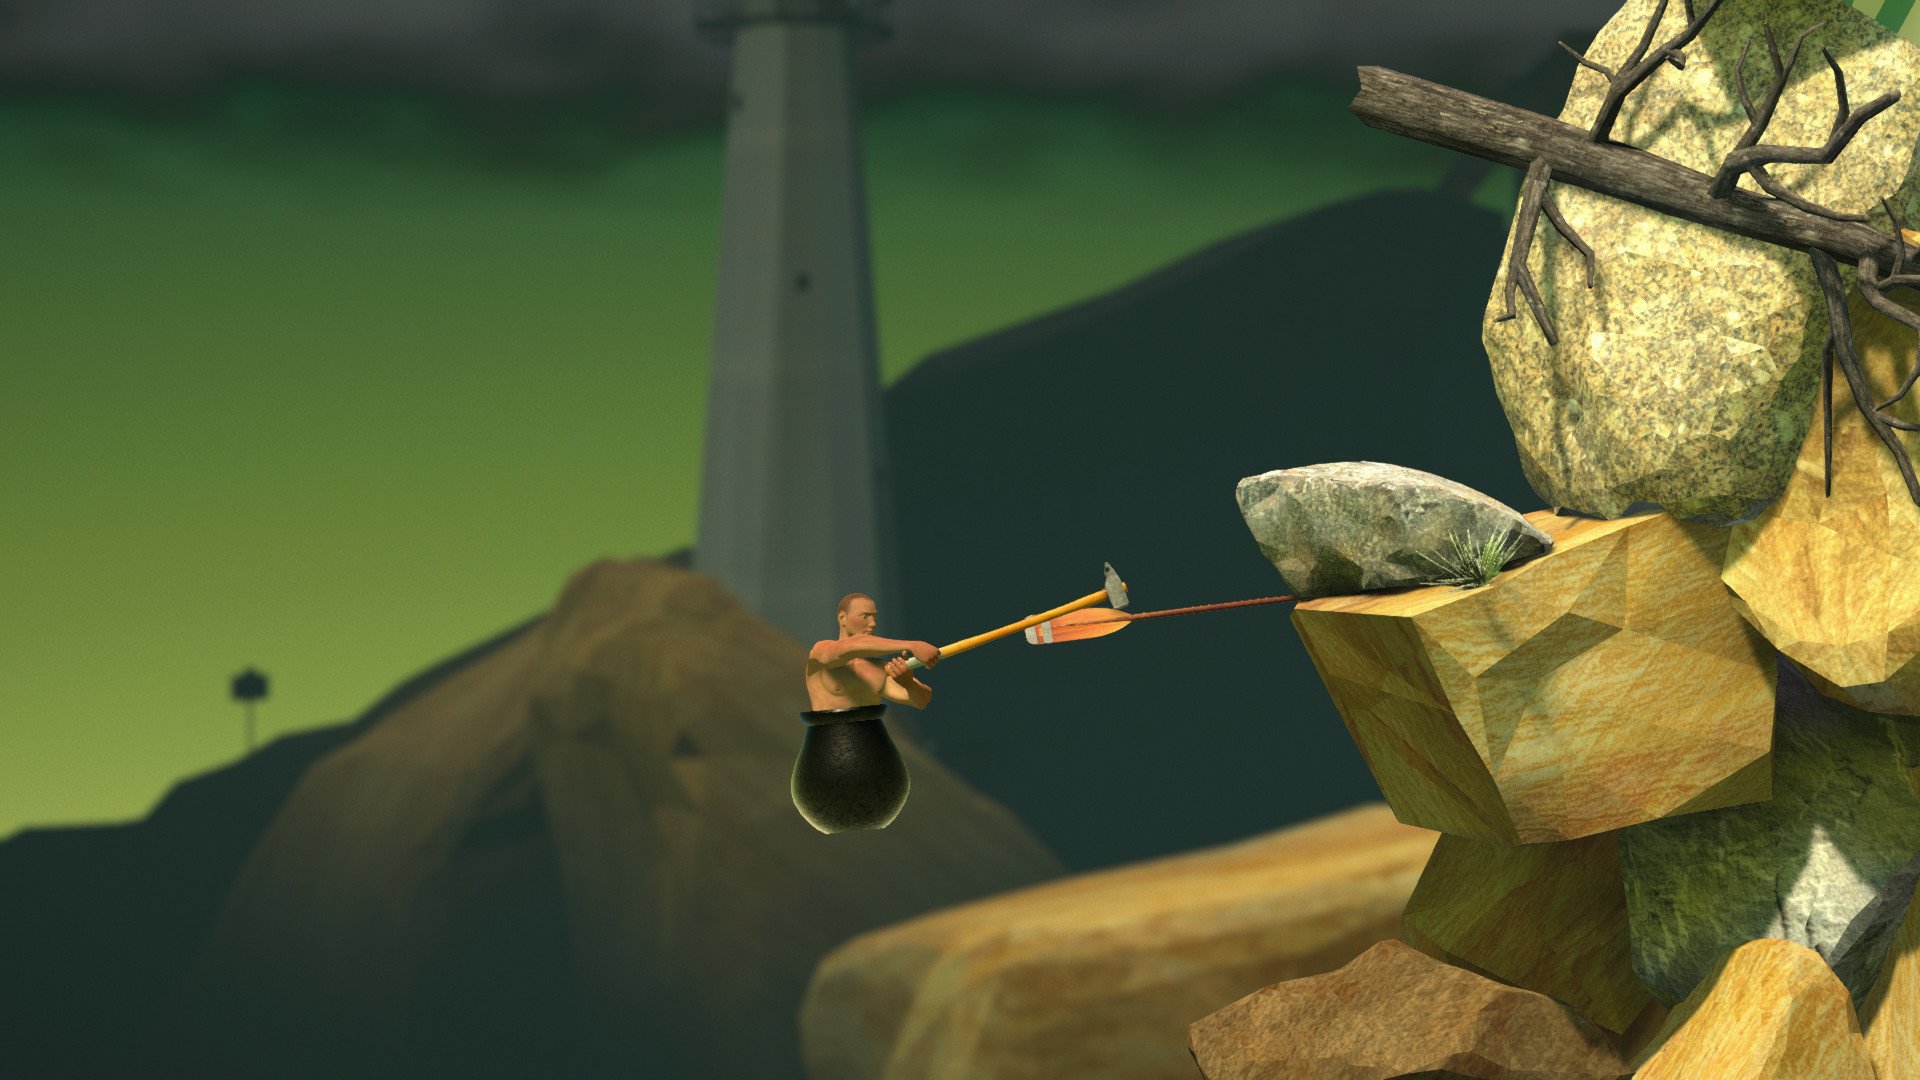 getting over it free download windows 10